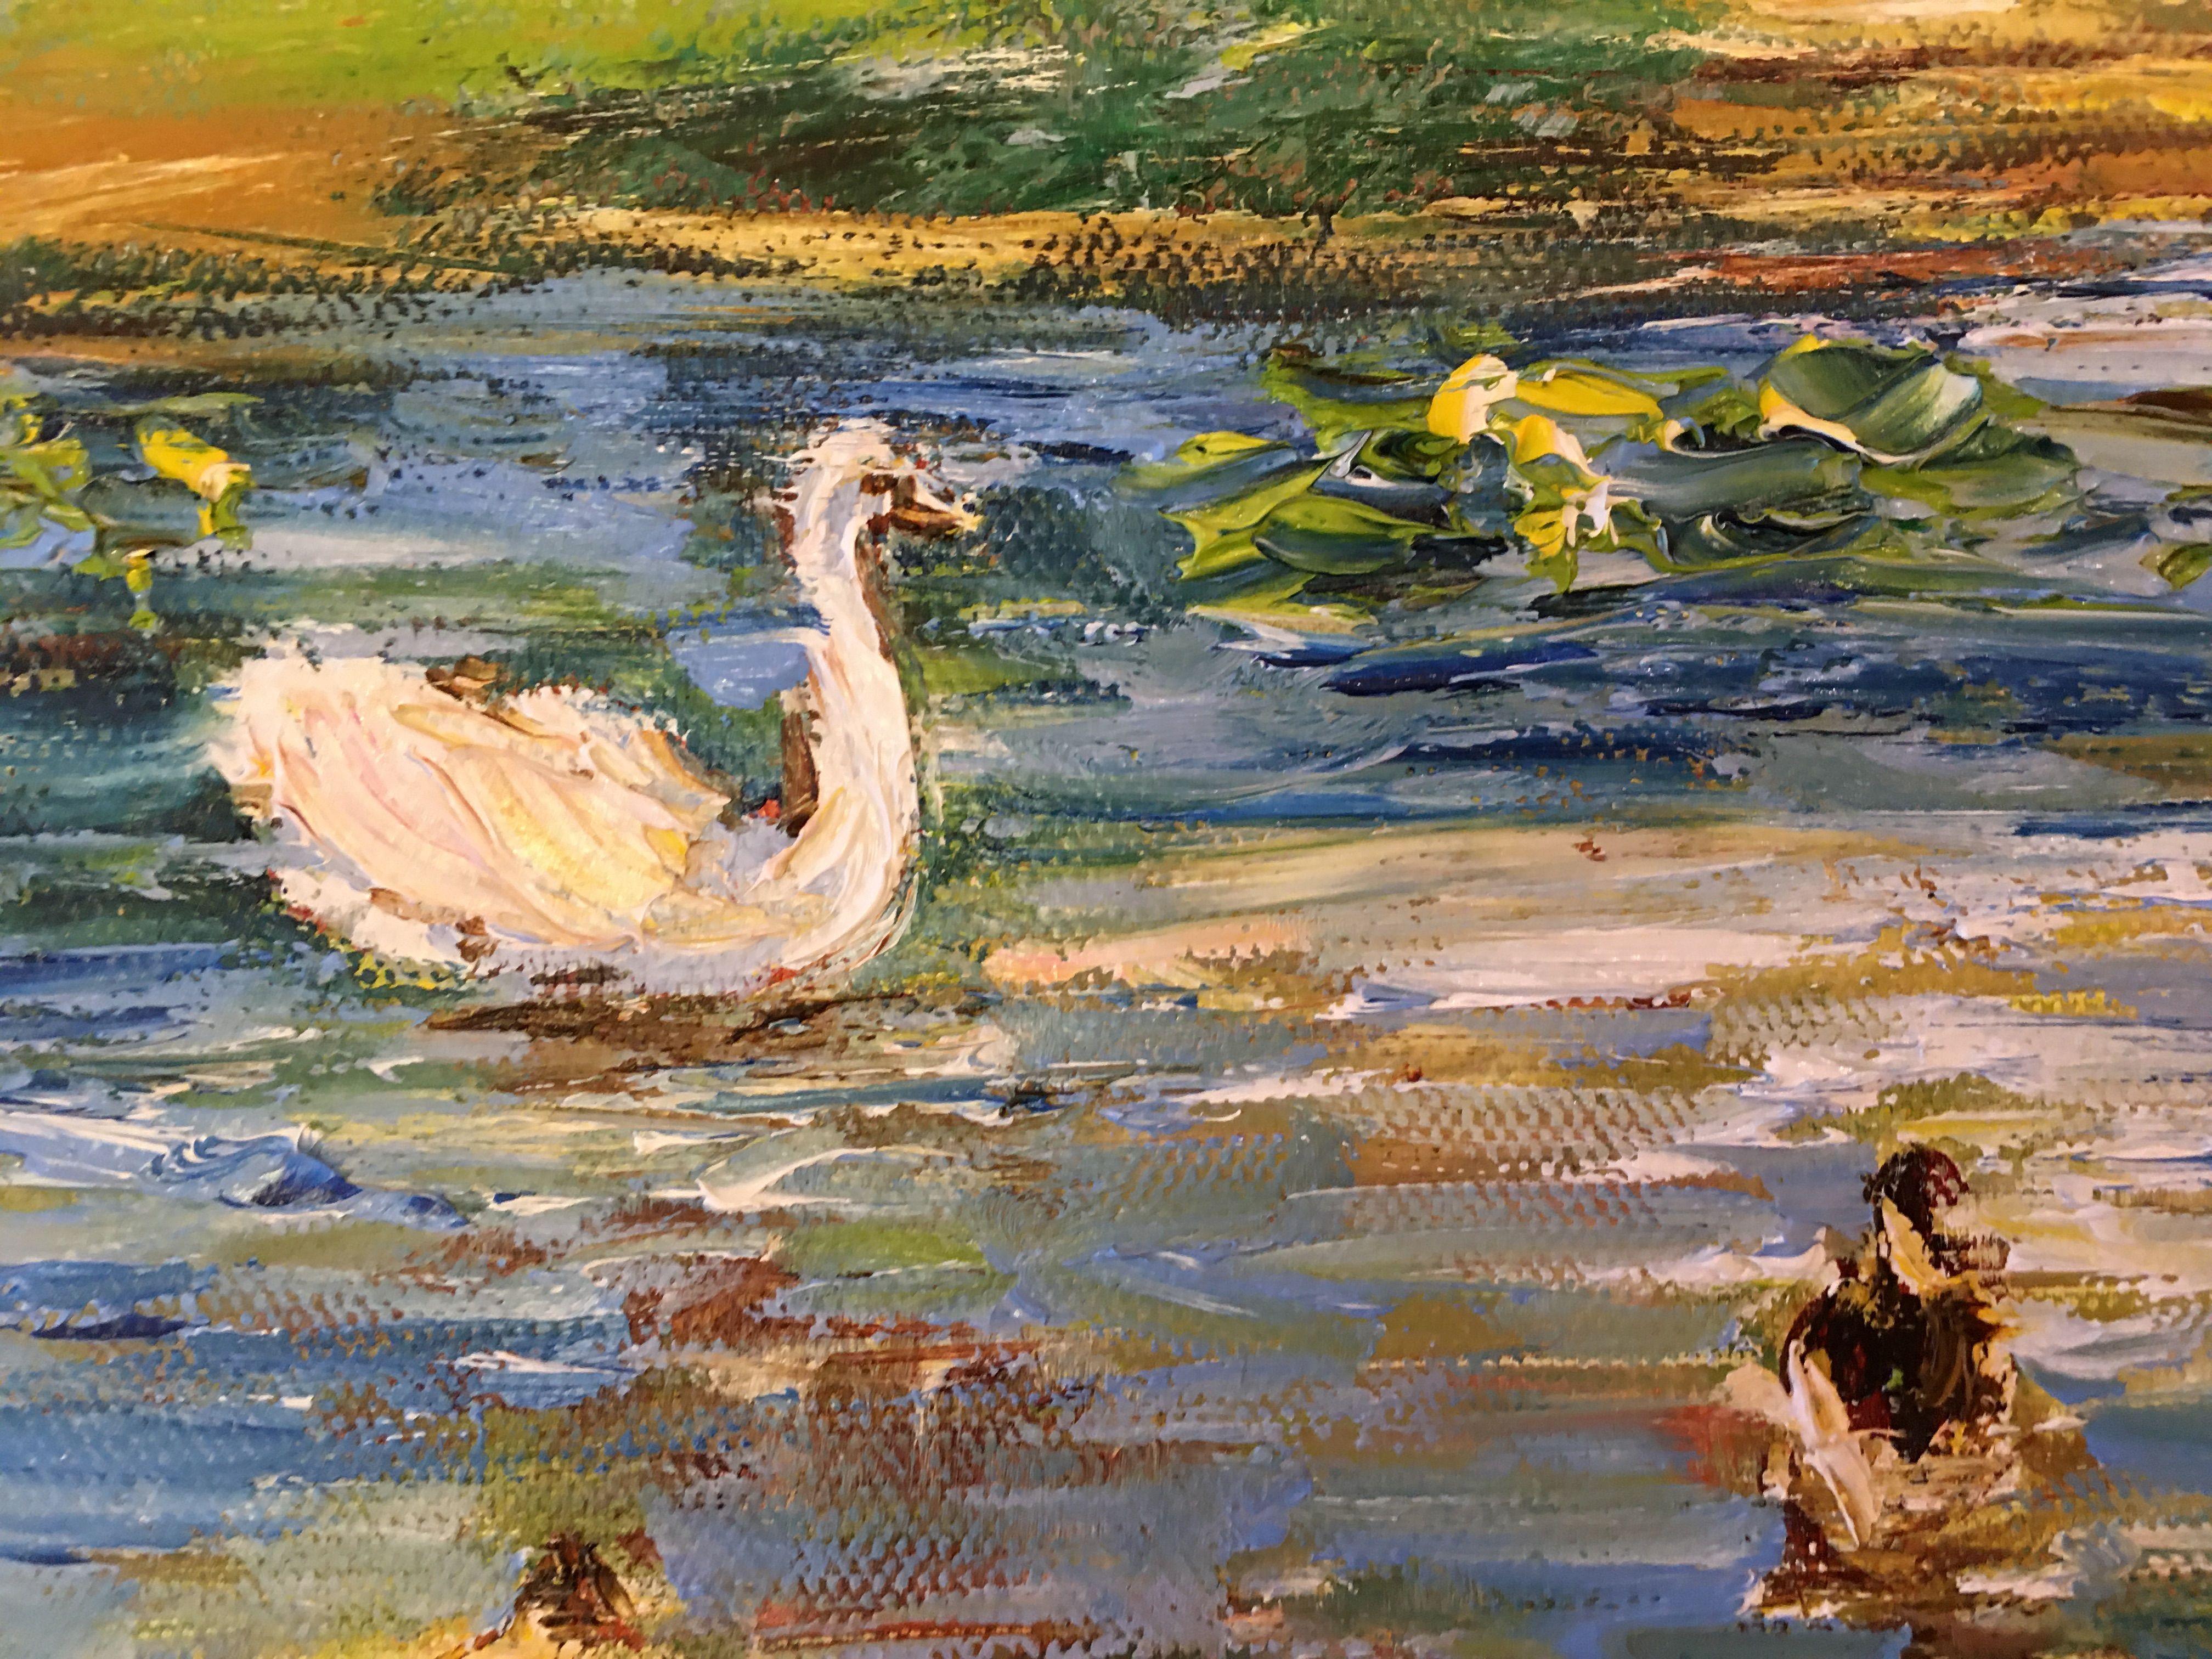 At the Pond, Painting, Oil on Canvas 2